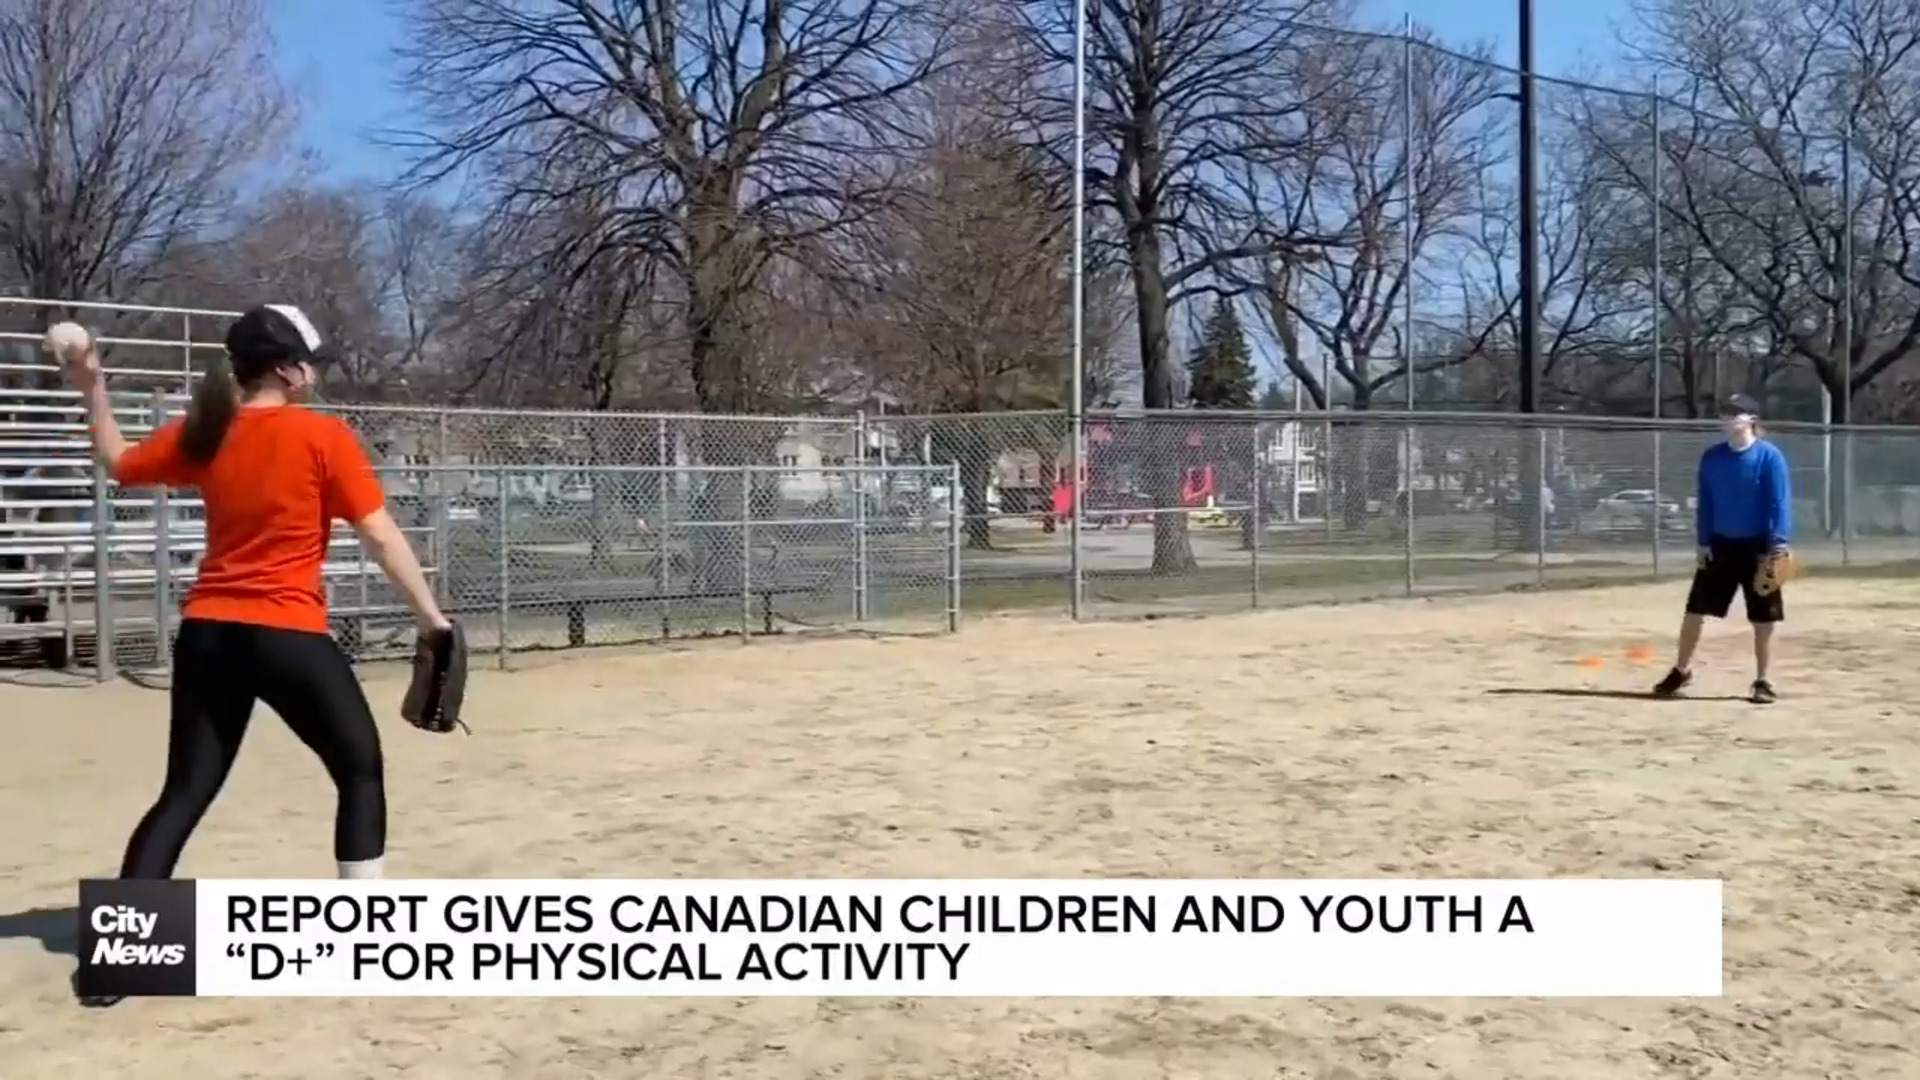 A new report gives Children and youth in Canada a “D+” for physical activity